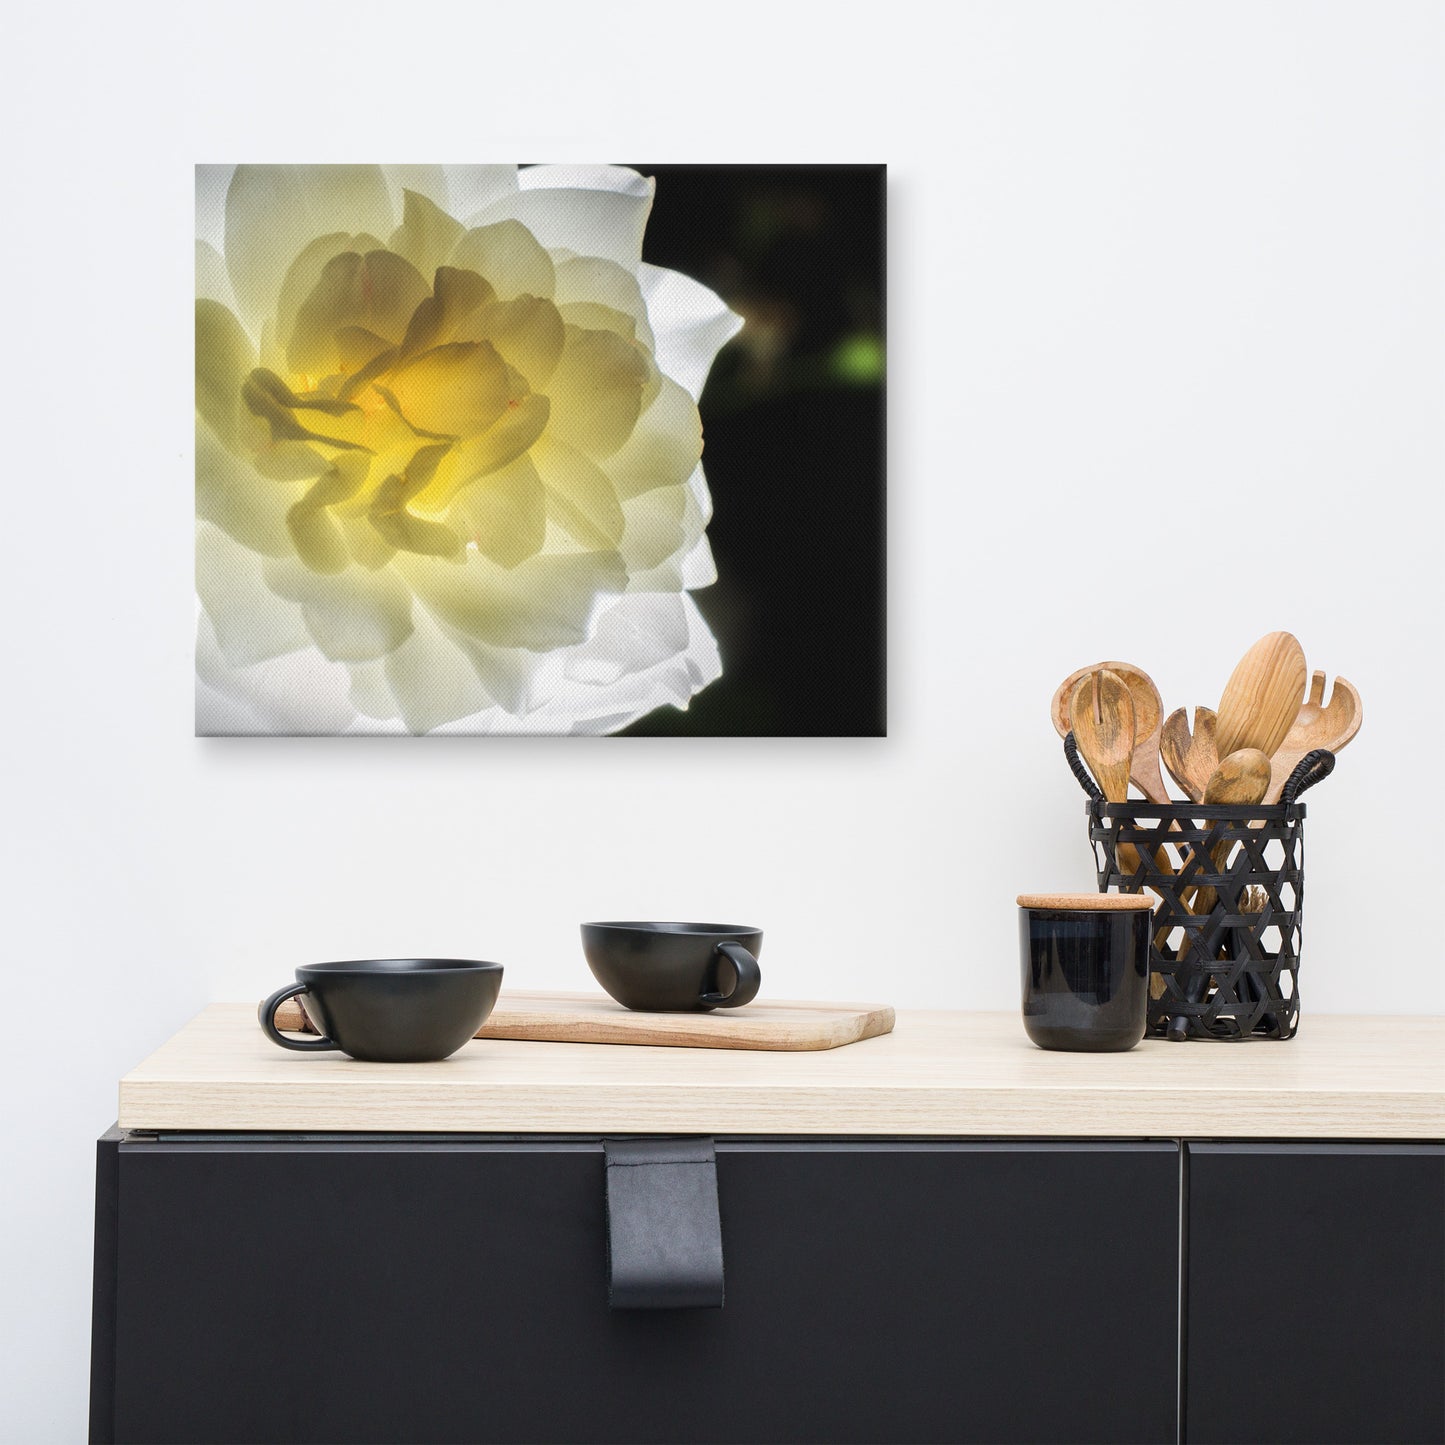 Glowing Rose 2 Floral Nature Canvas Wall Art Prints